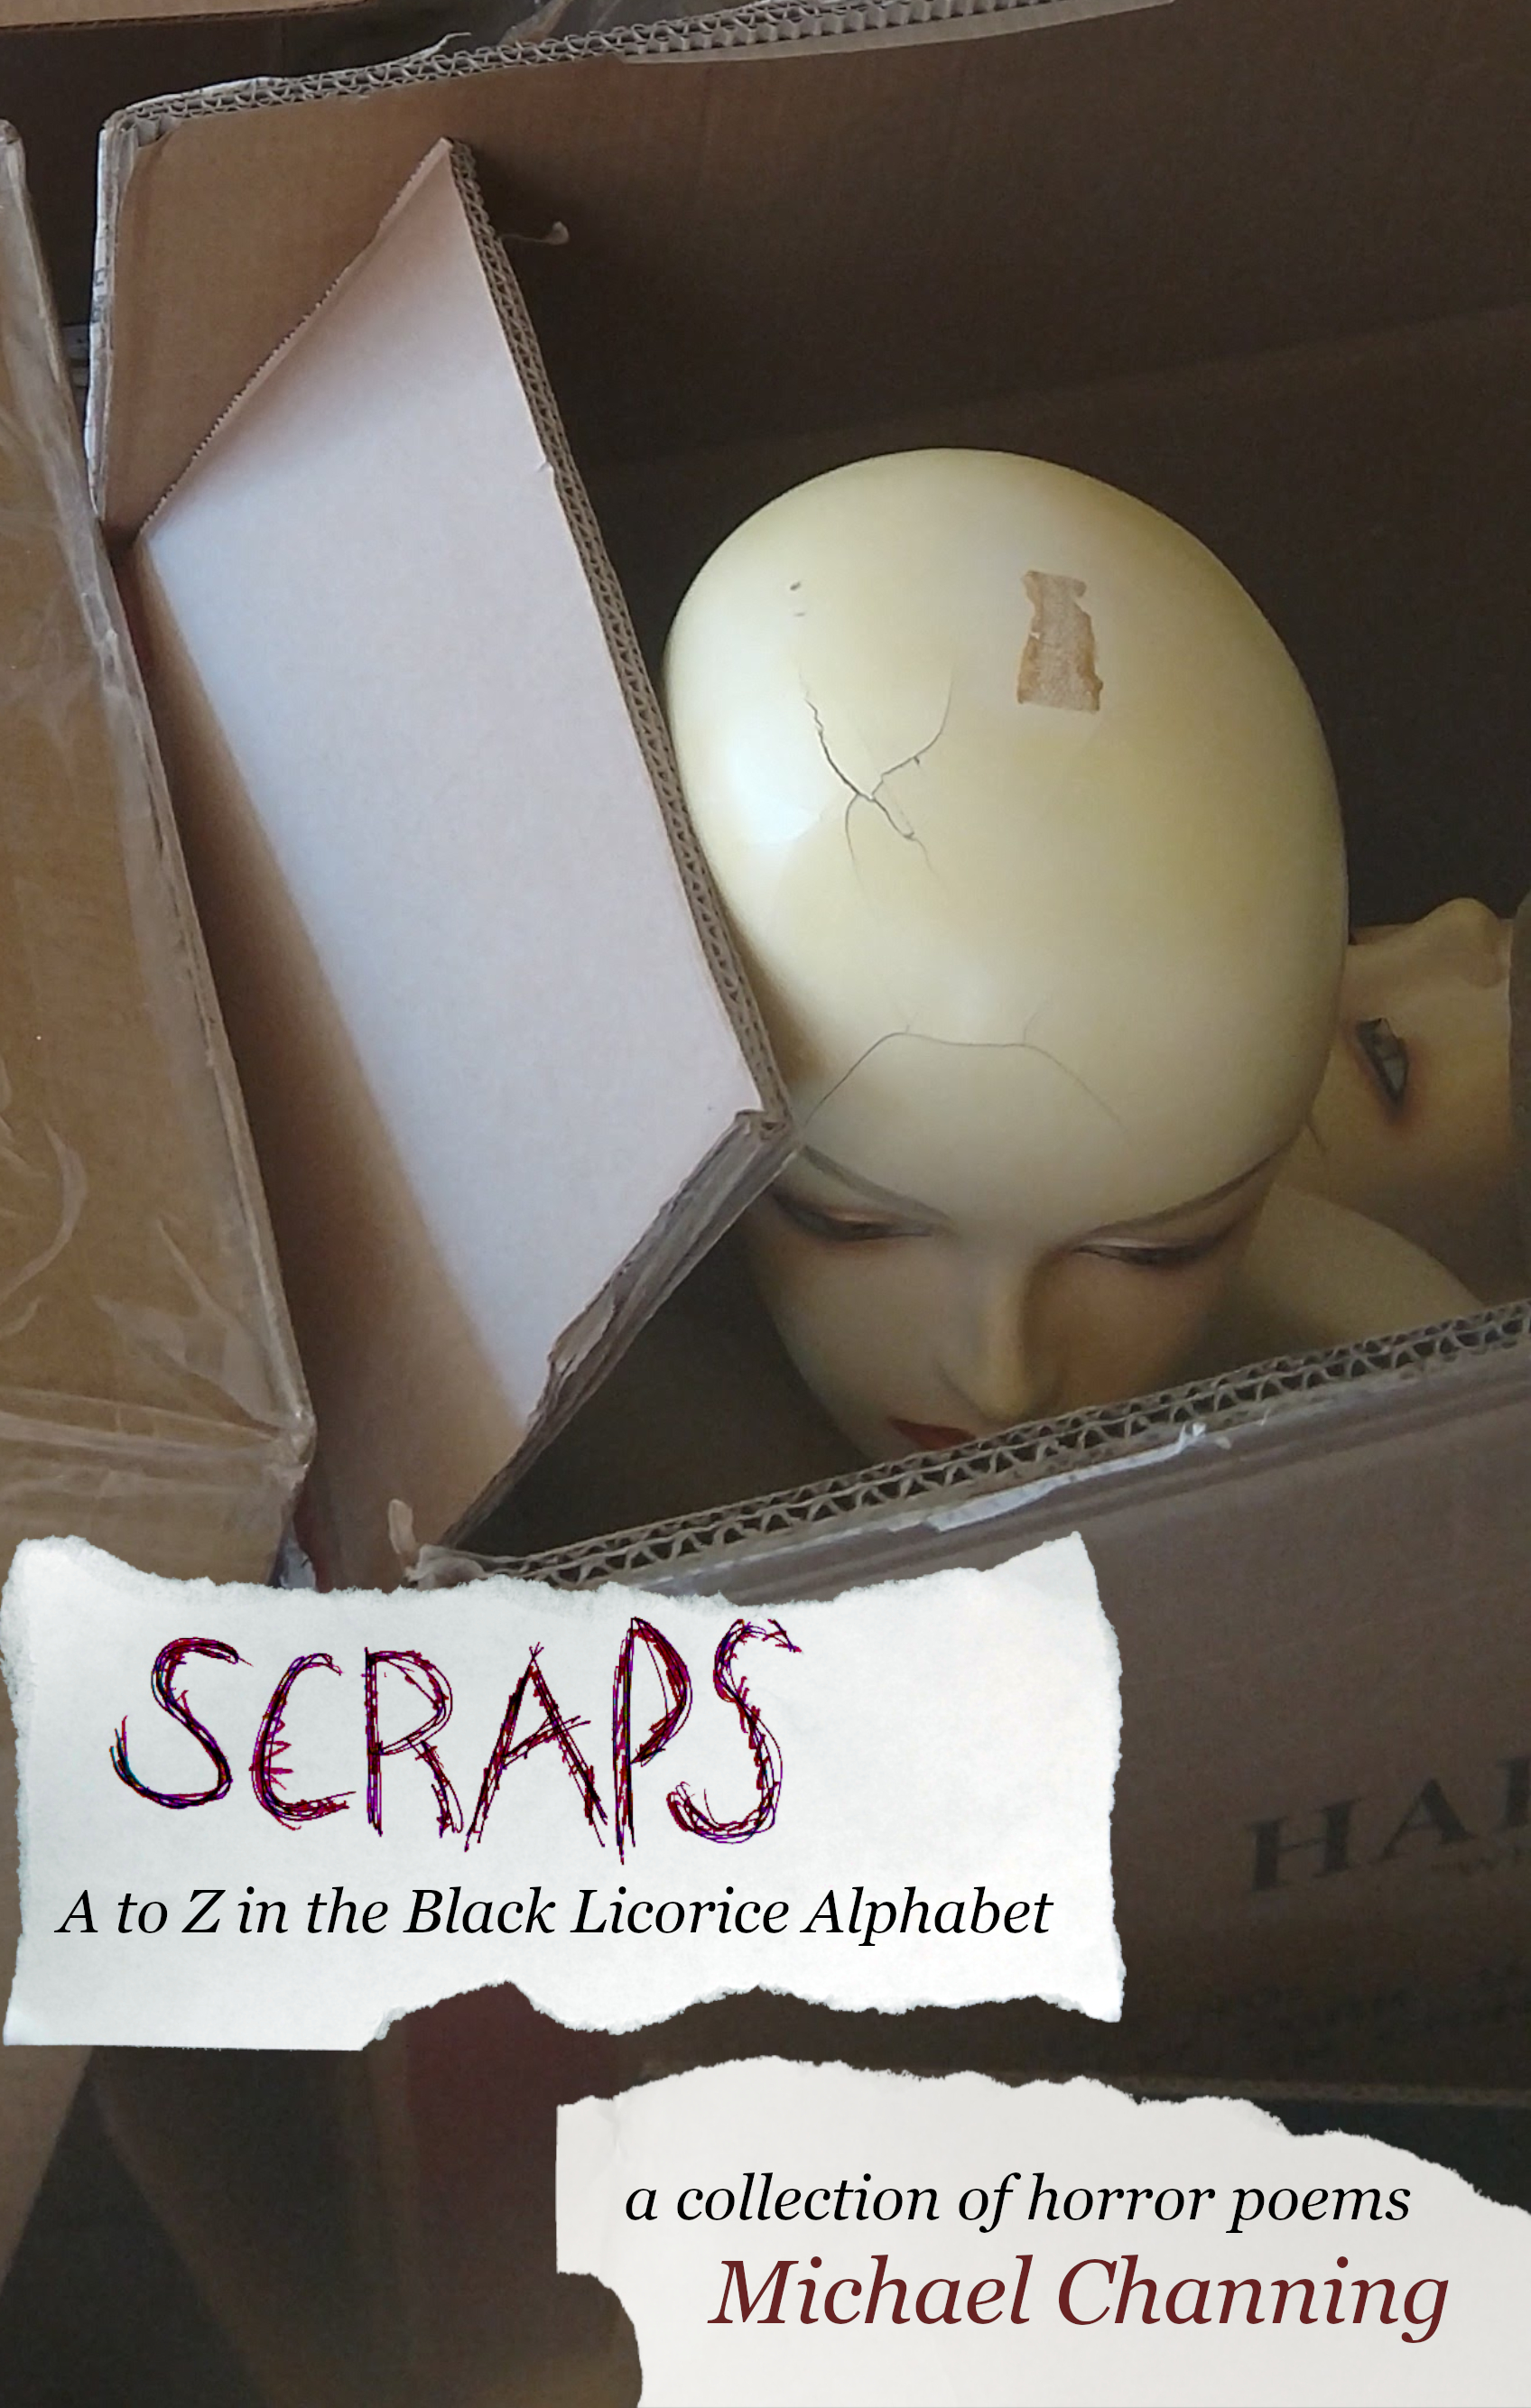 Scraps, a book of horror poems by Michael Channing